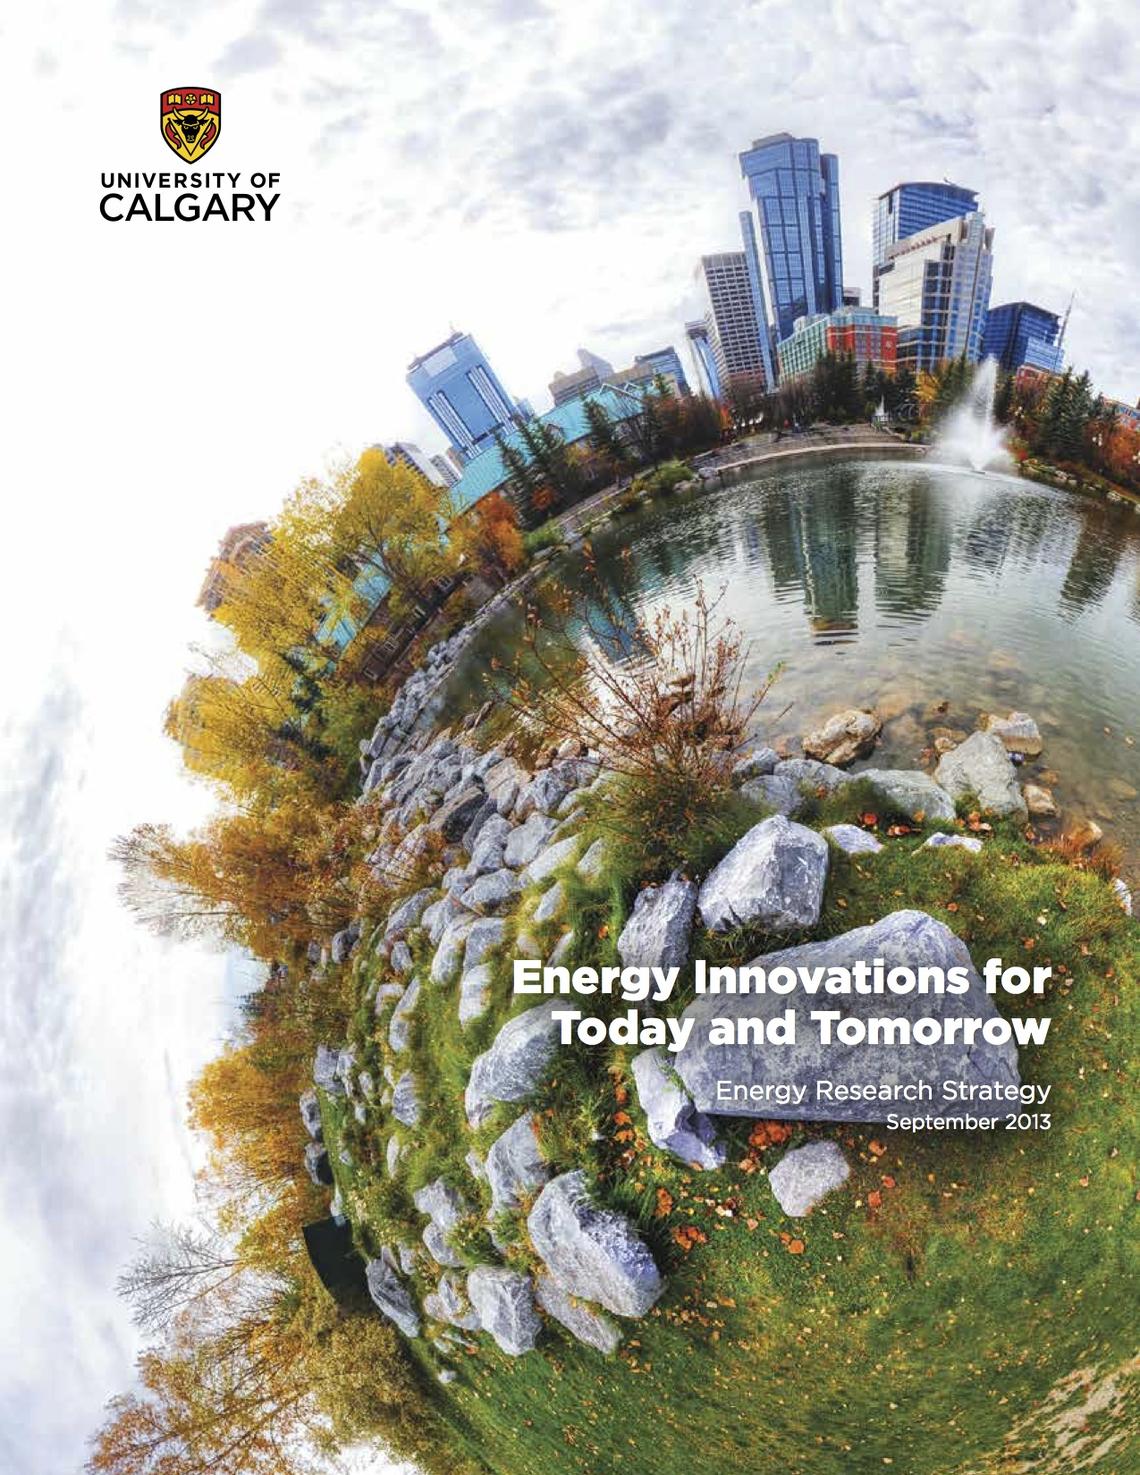 Read the Energy Innovations for Today and Tomorrow Energy Research Strategy. 